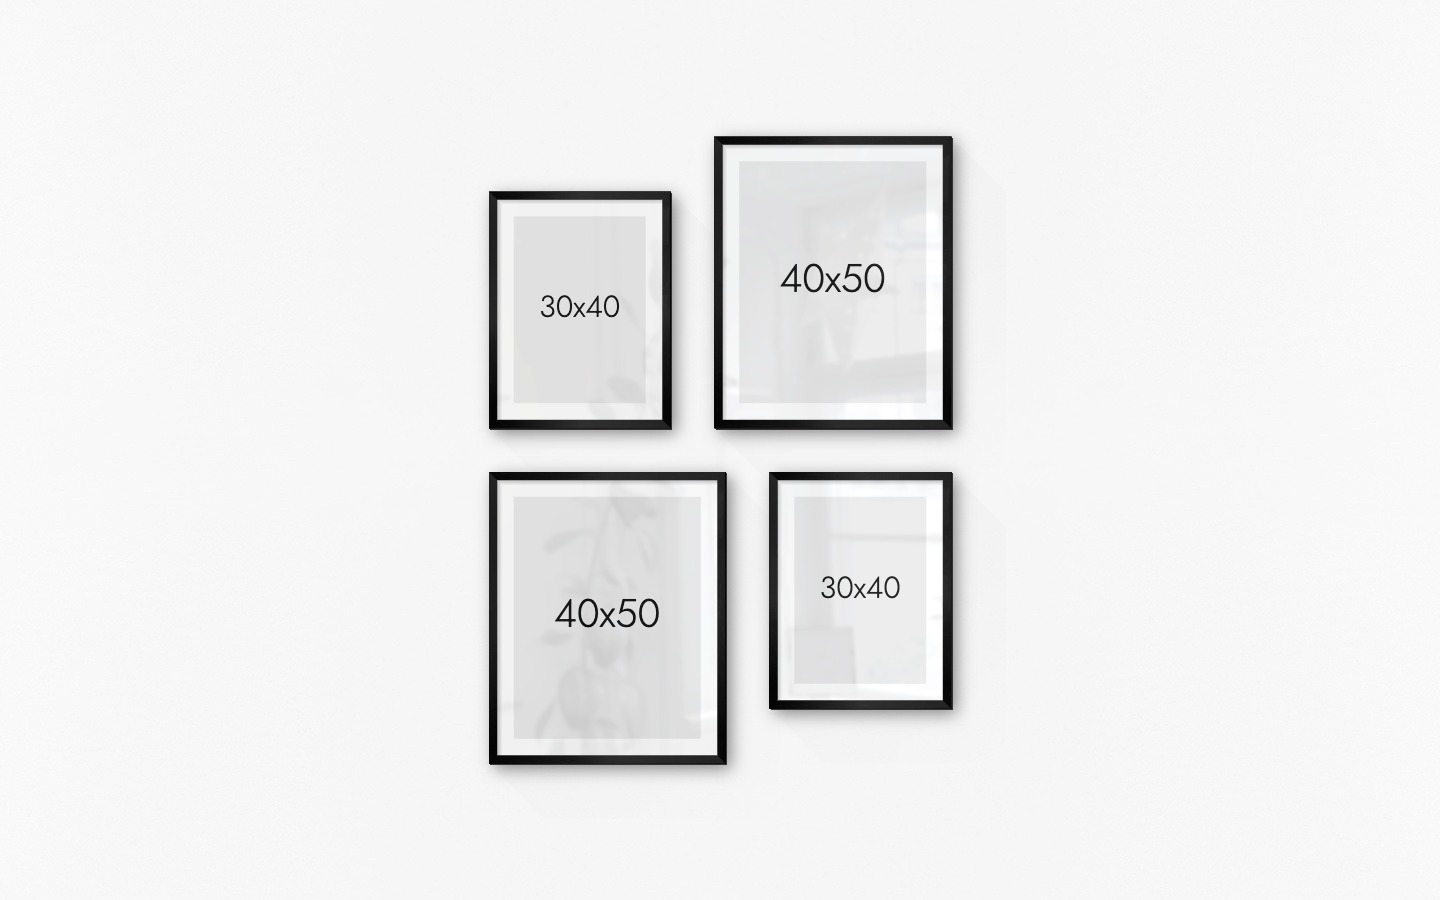 Gallery wall with picture frames in black in sizes 30x40 and 40x50